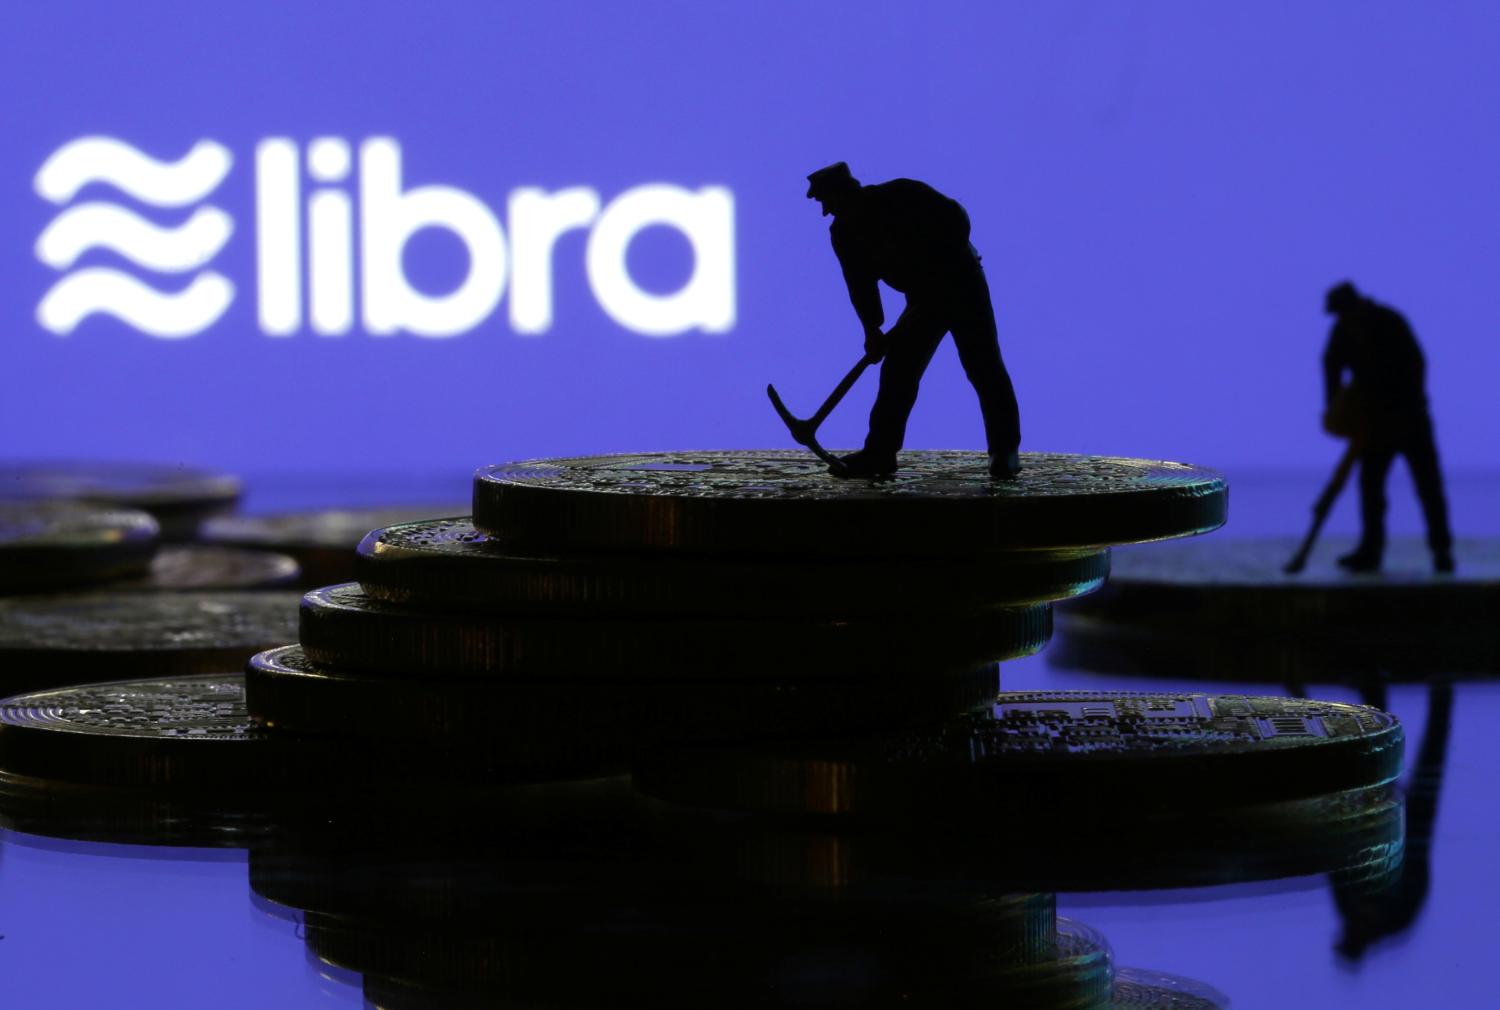 Small toy figures are seen on representations of virtual currency in front of the Libra logo in this illustration picture, June 21, 2019. REUTERS/Dado Ruvic/Illustration - RC11B30C87B0